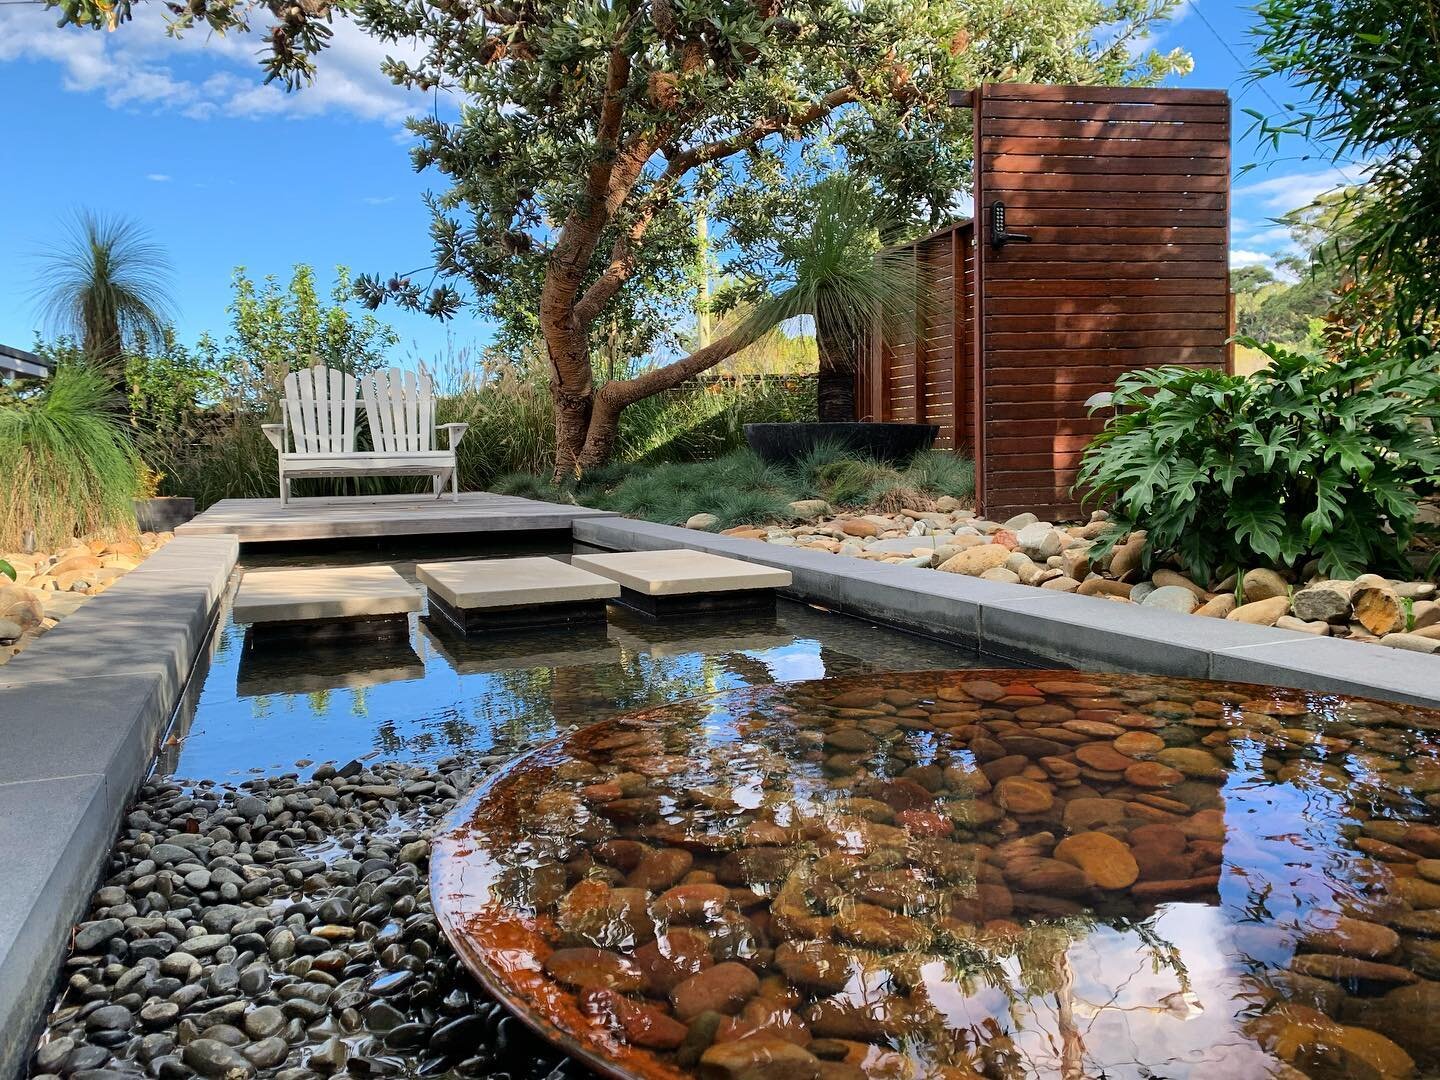 Relaxation goals for this weekend ☀️ who else would love sit at the waters edge under this flawless banksia specimen 🌱?! .
.
.

#exteriordesign #gardendesign #landscaping
#landscapearchitecture #landscapedesign  #landscapearchitect #gardening #exter